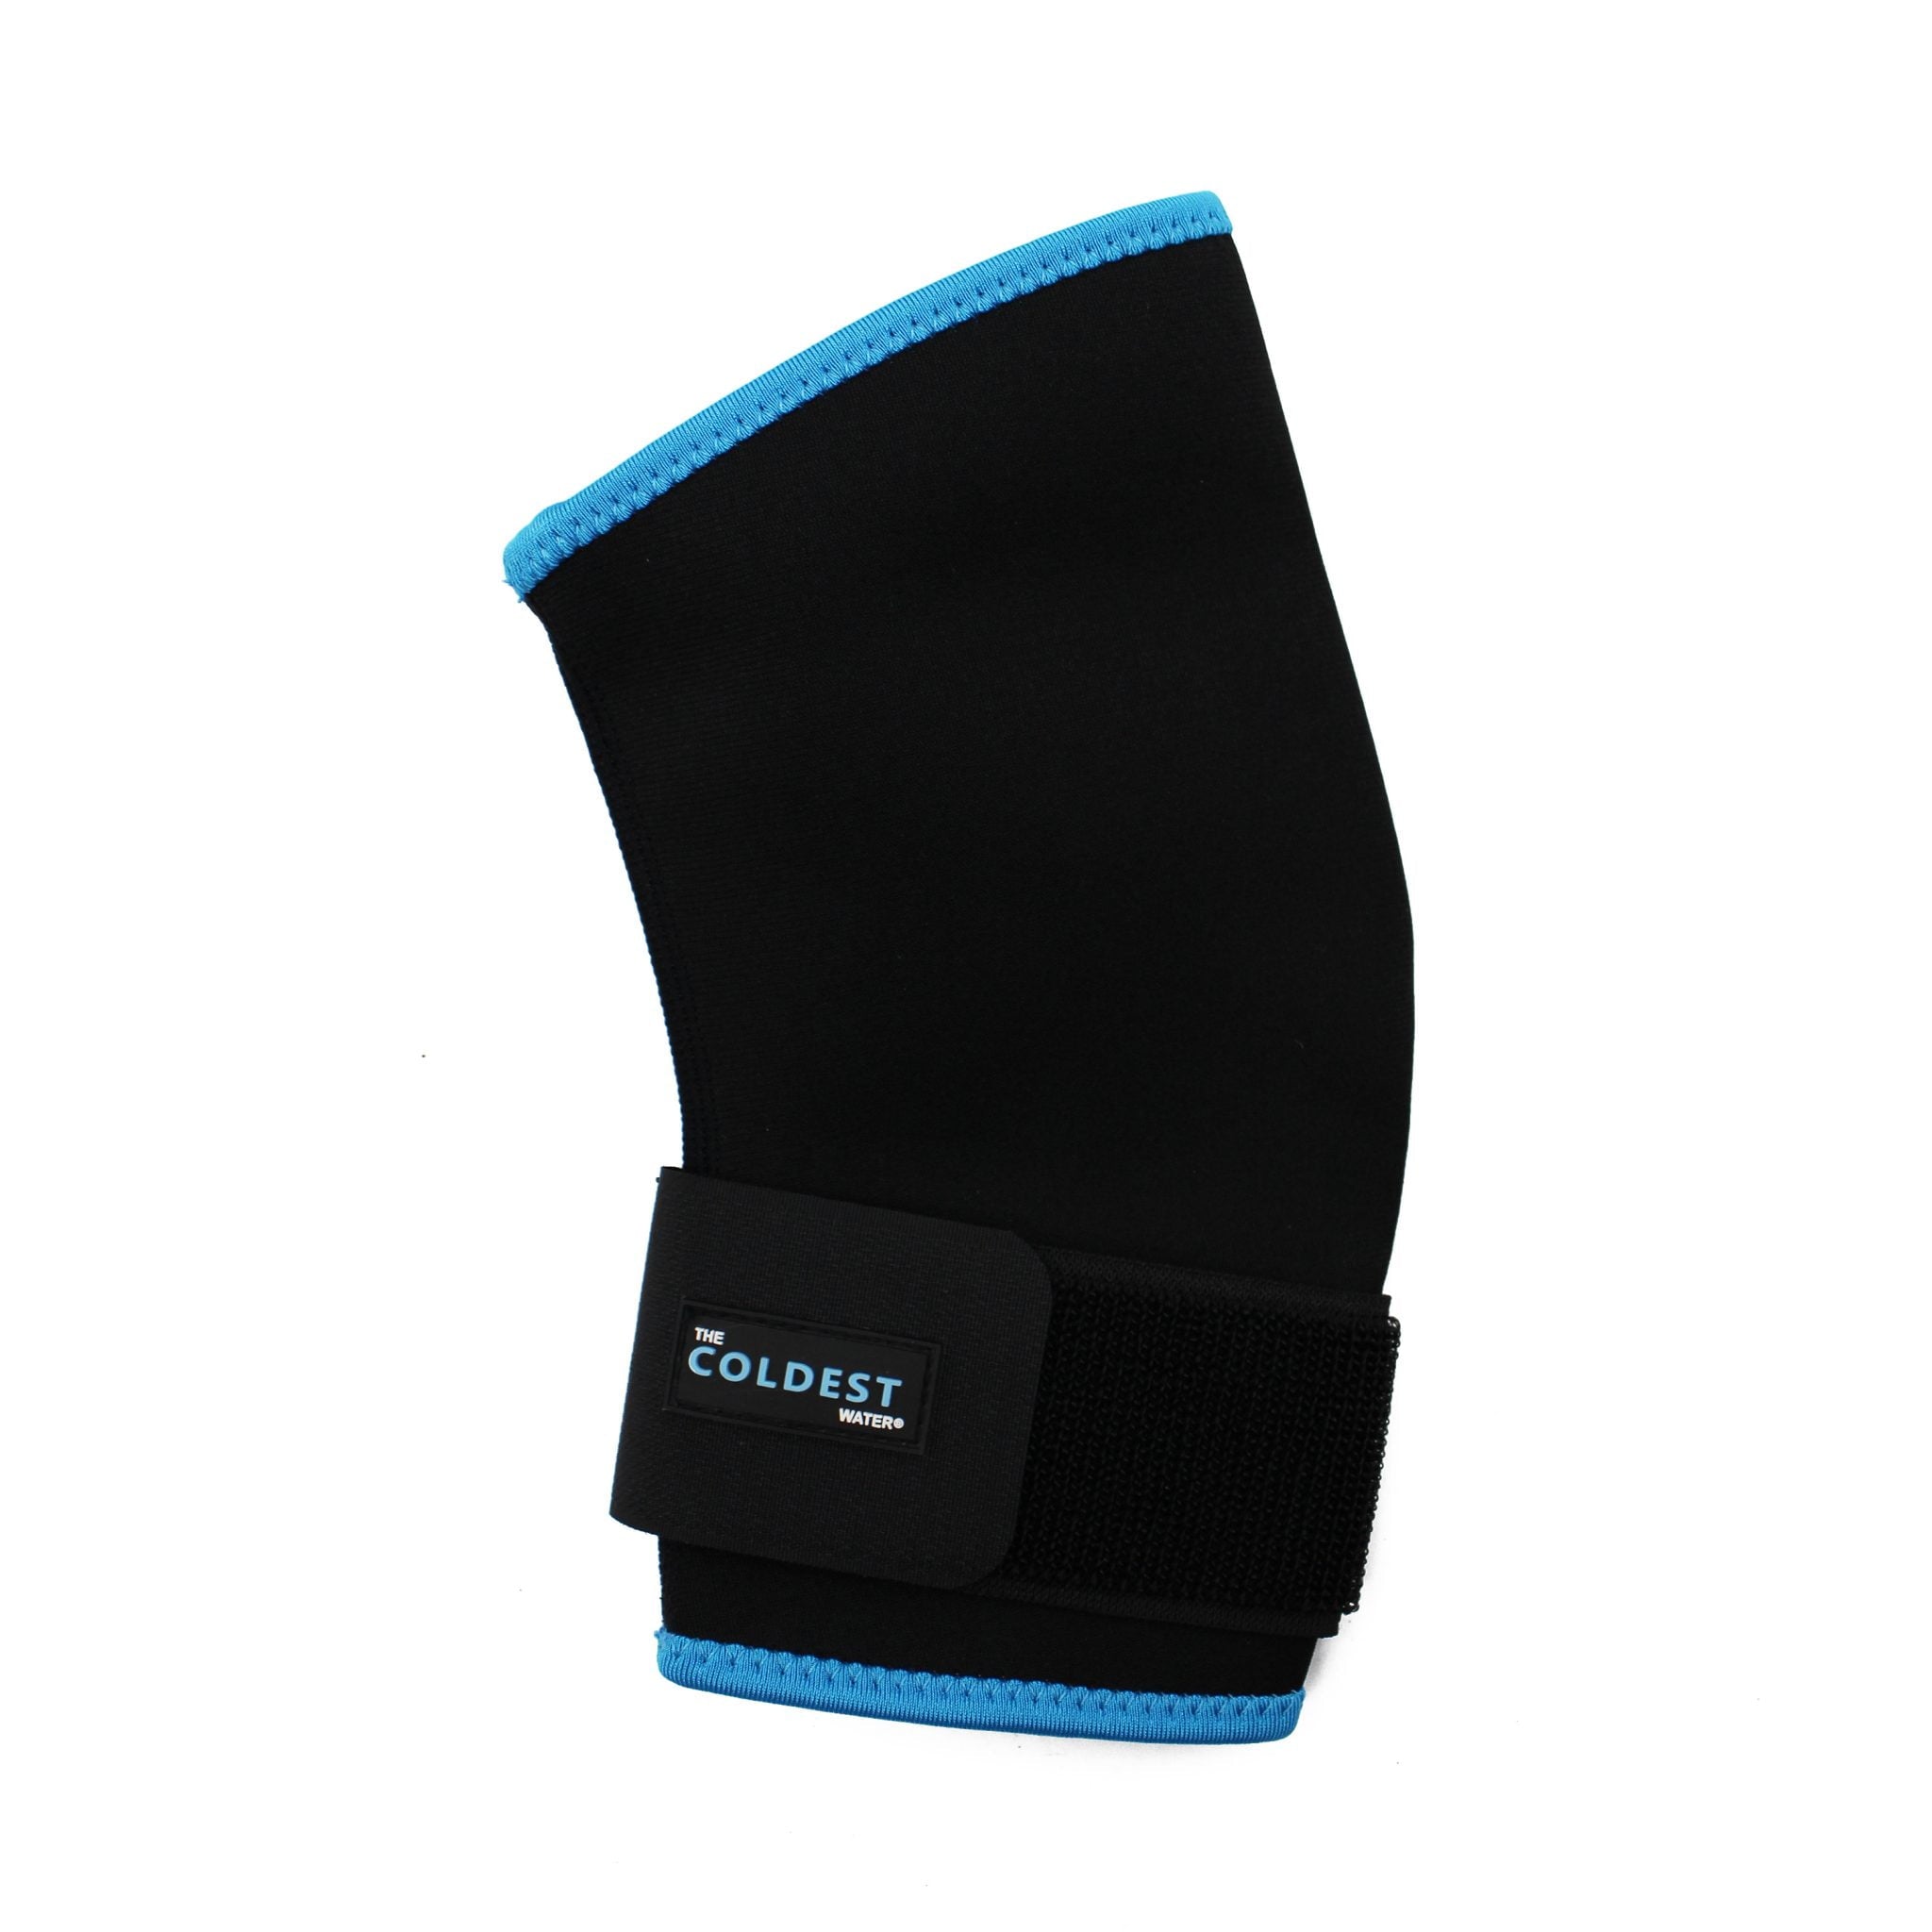 The Coldest Elbow Brace - The Coldest Water